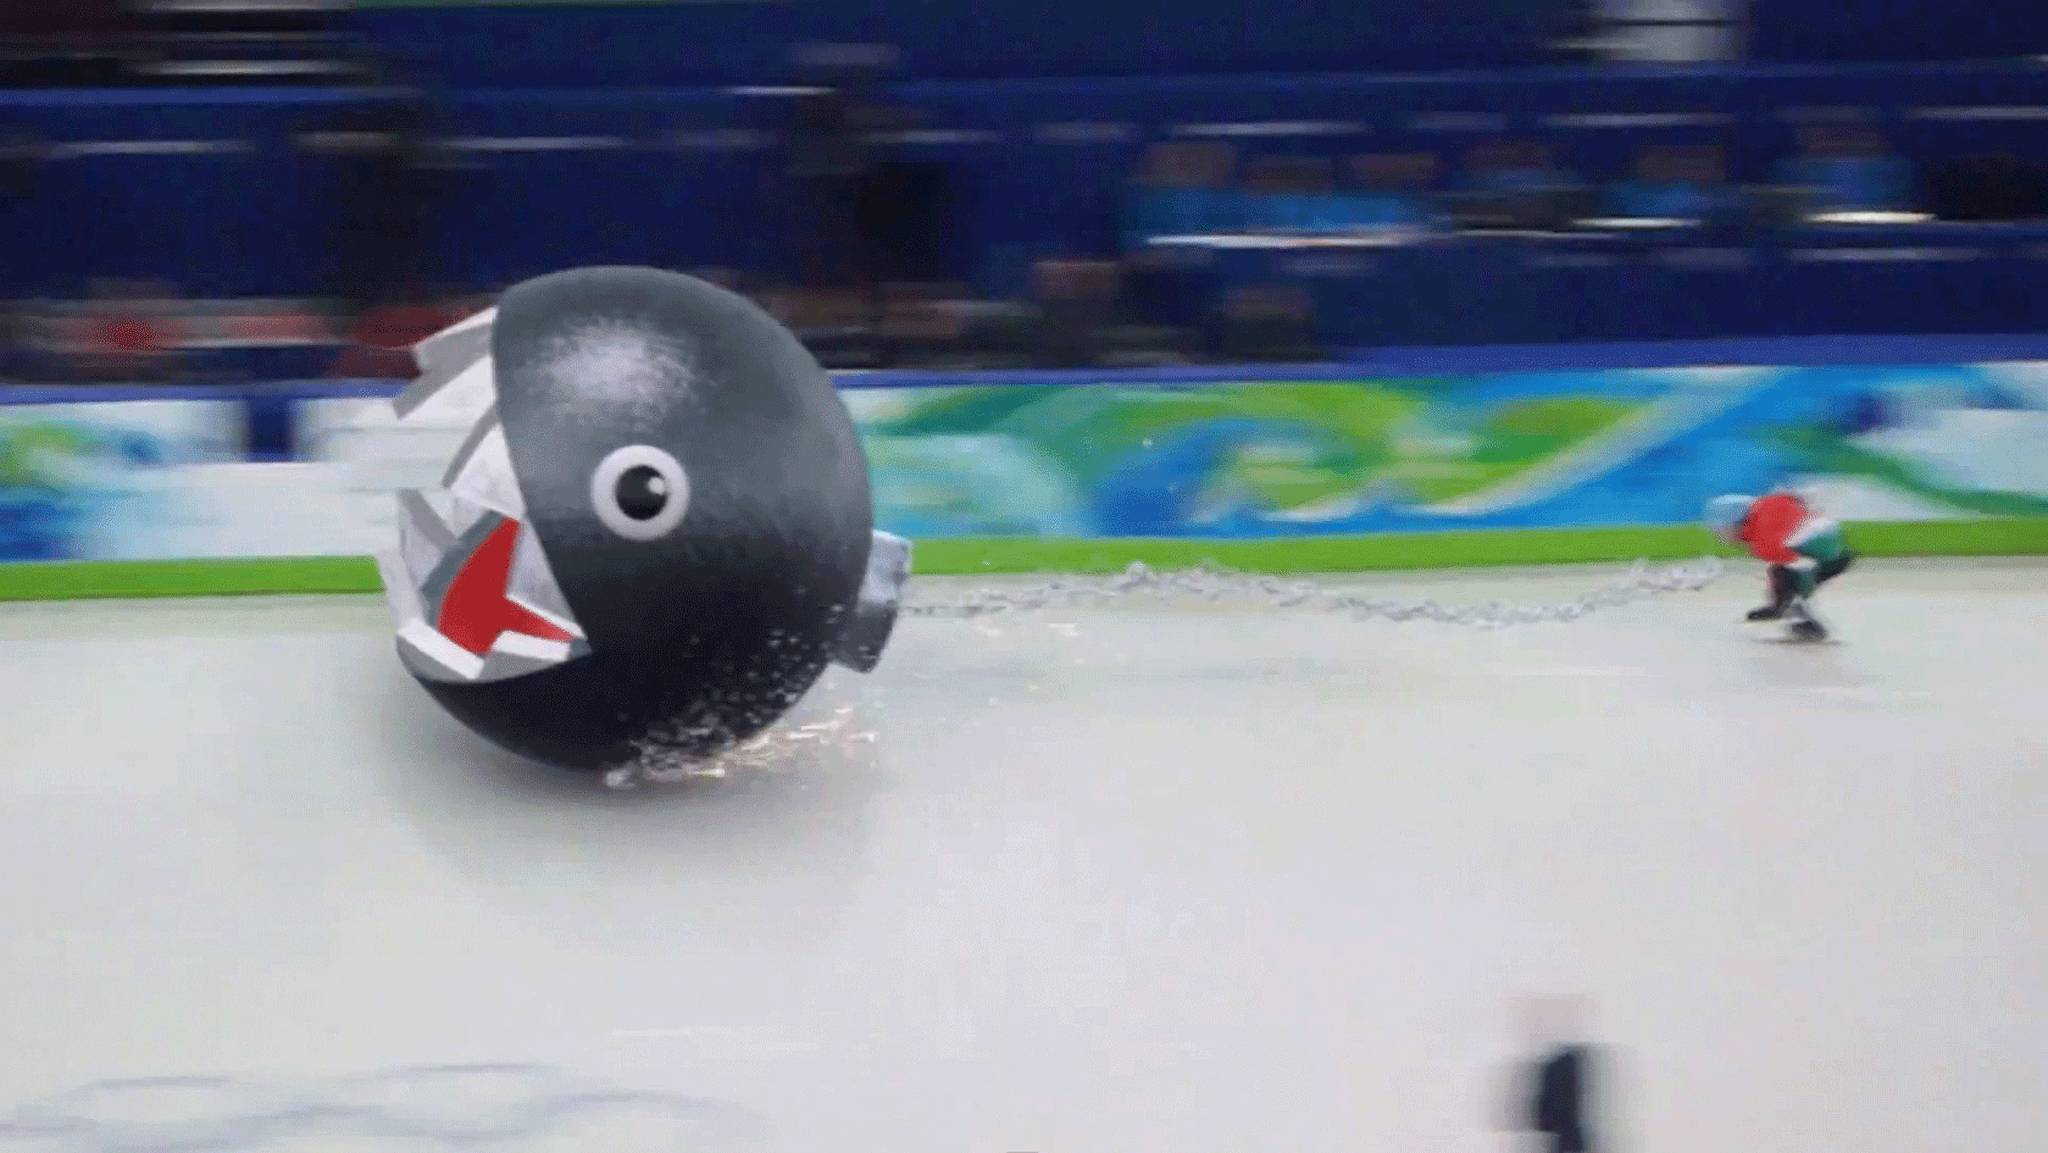 A speed skater gets a little help from Chain Chomp